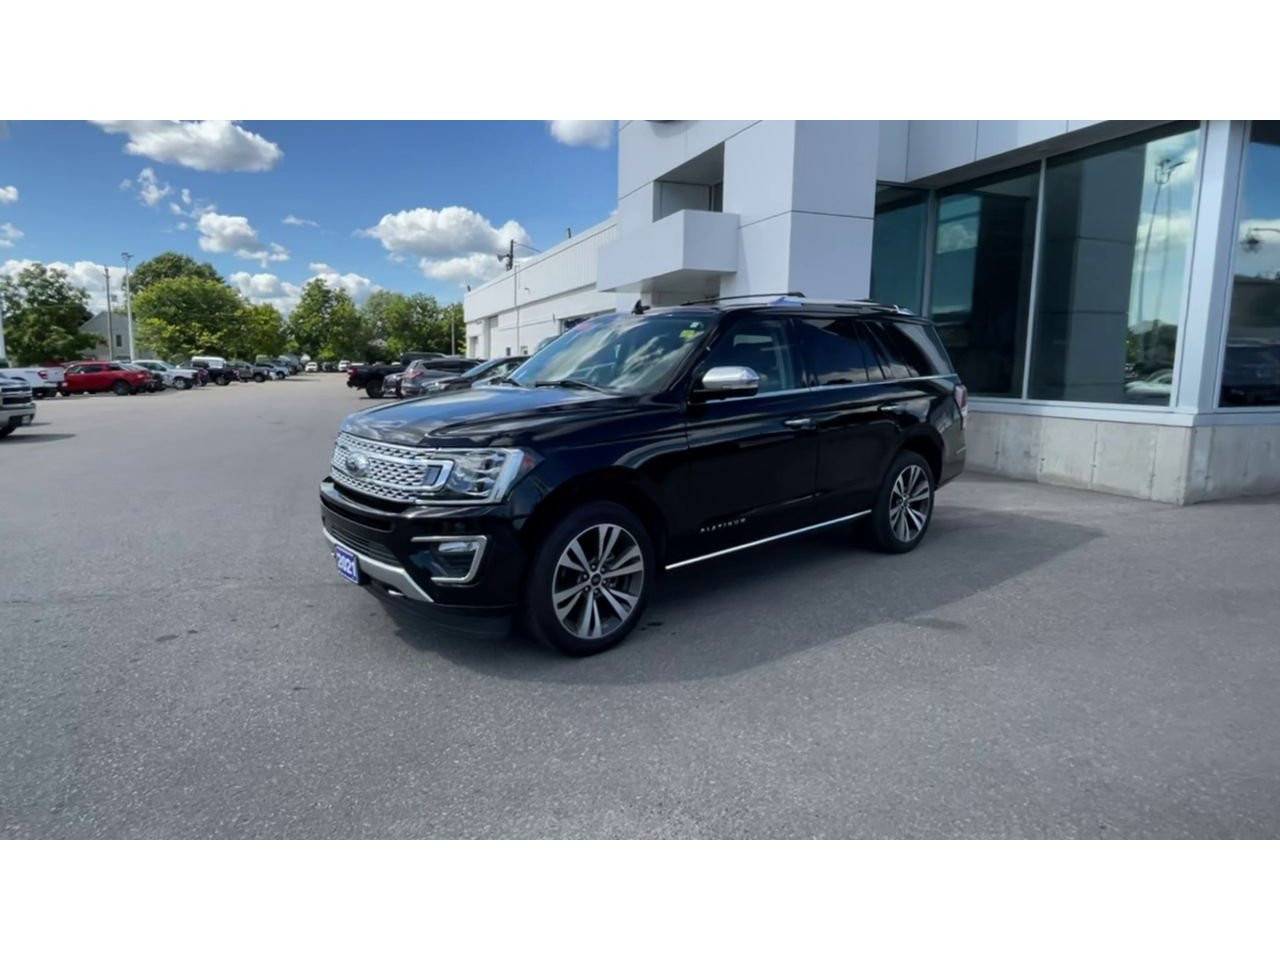 2021 Ford Expedition - P21237 Full Image 4